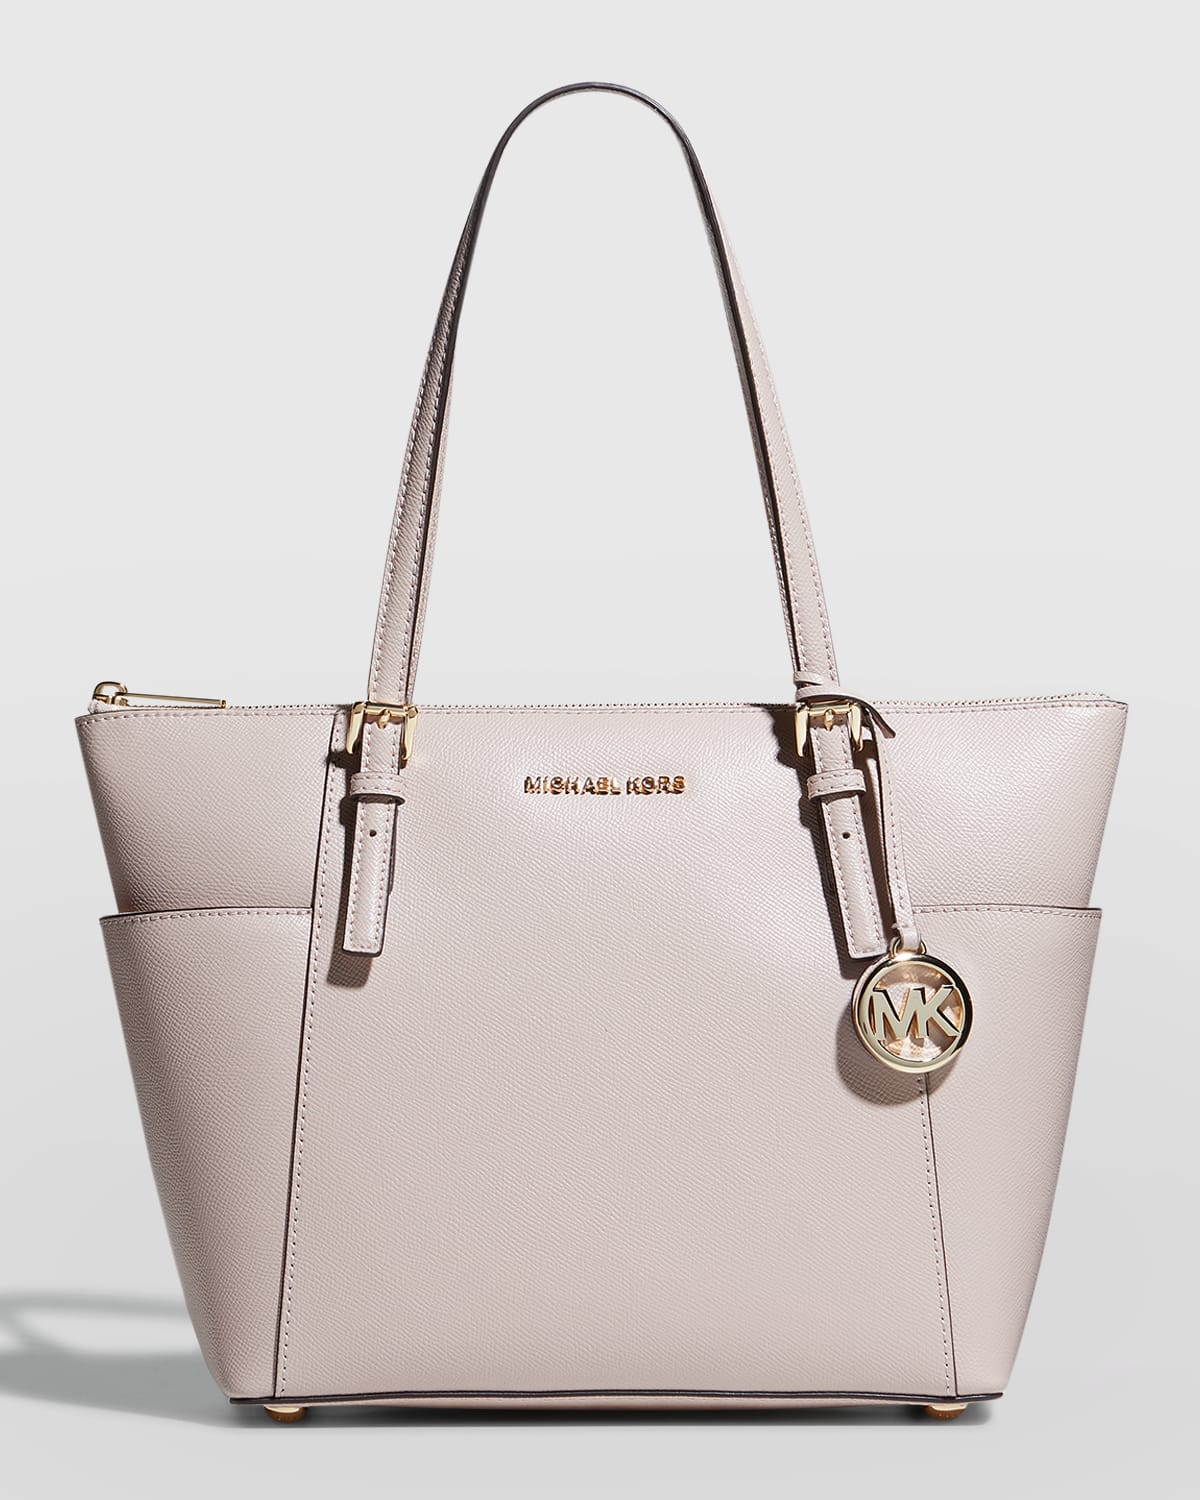 kate spade new york margaux large leather tote | Neiman Marcus